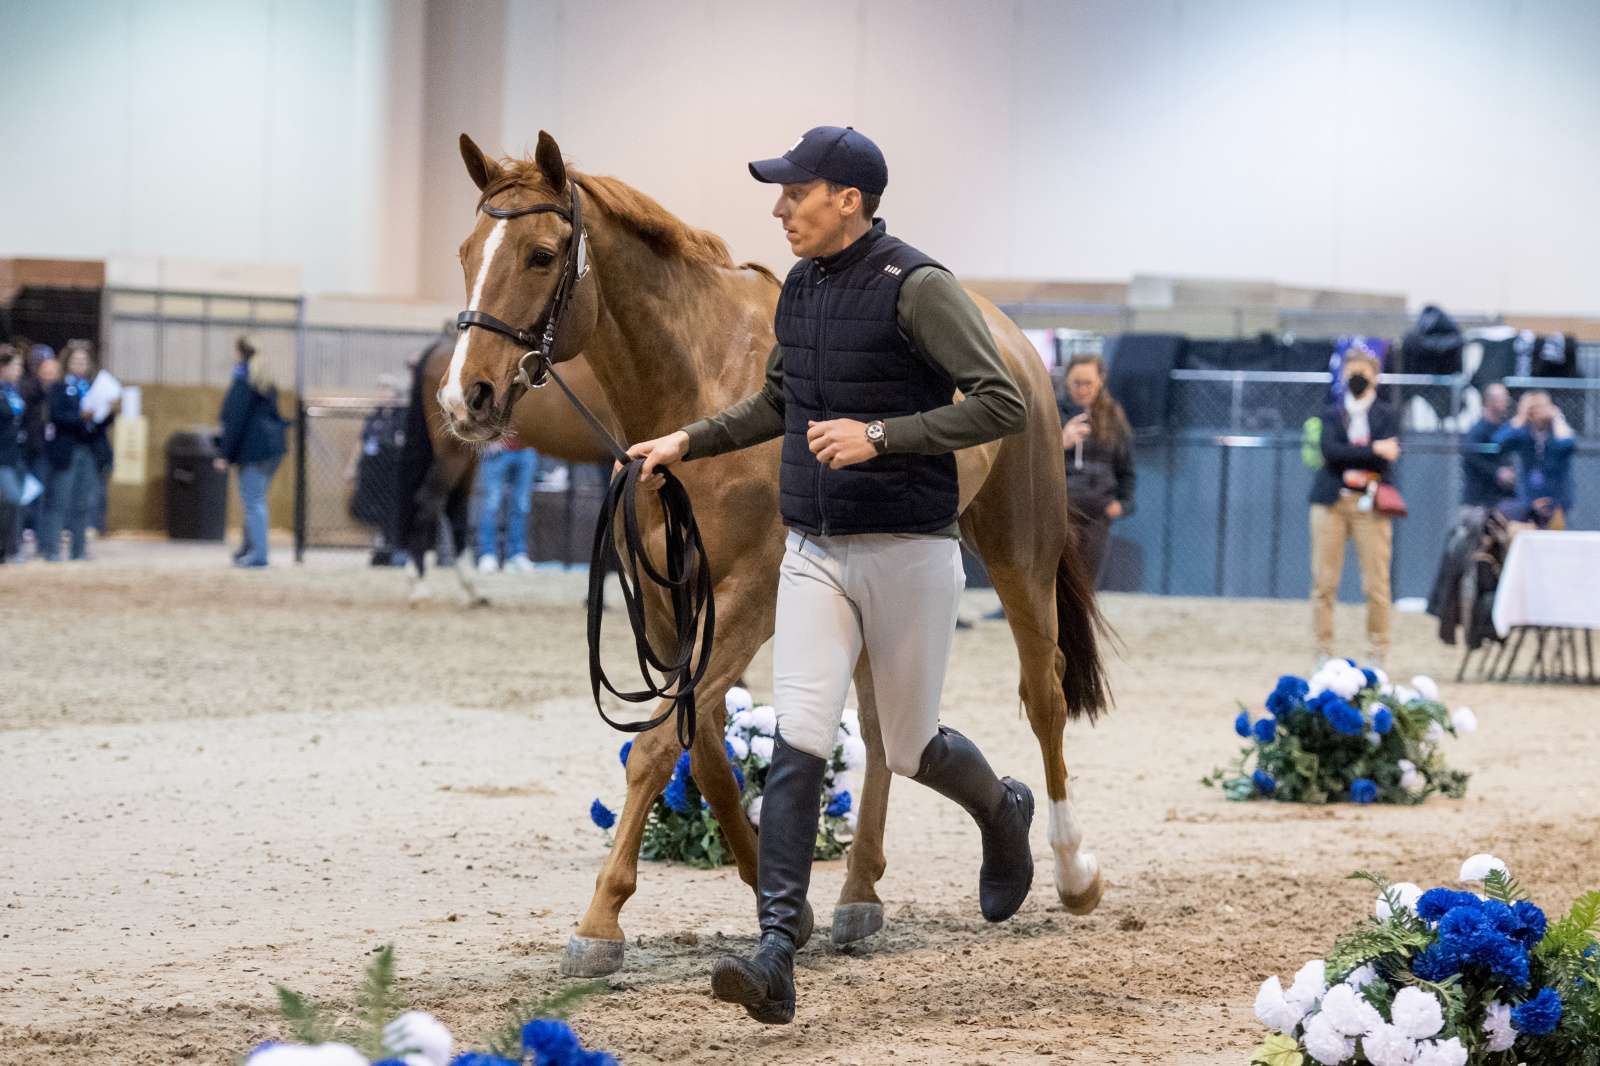 Double World Champions Sweden's Henrik von Eckermann and King Edward will be chasing the title at the Longines FEI Jumping World Cup™ Final 2023 in Omaha (USA) - FEI / Richard Juilliart